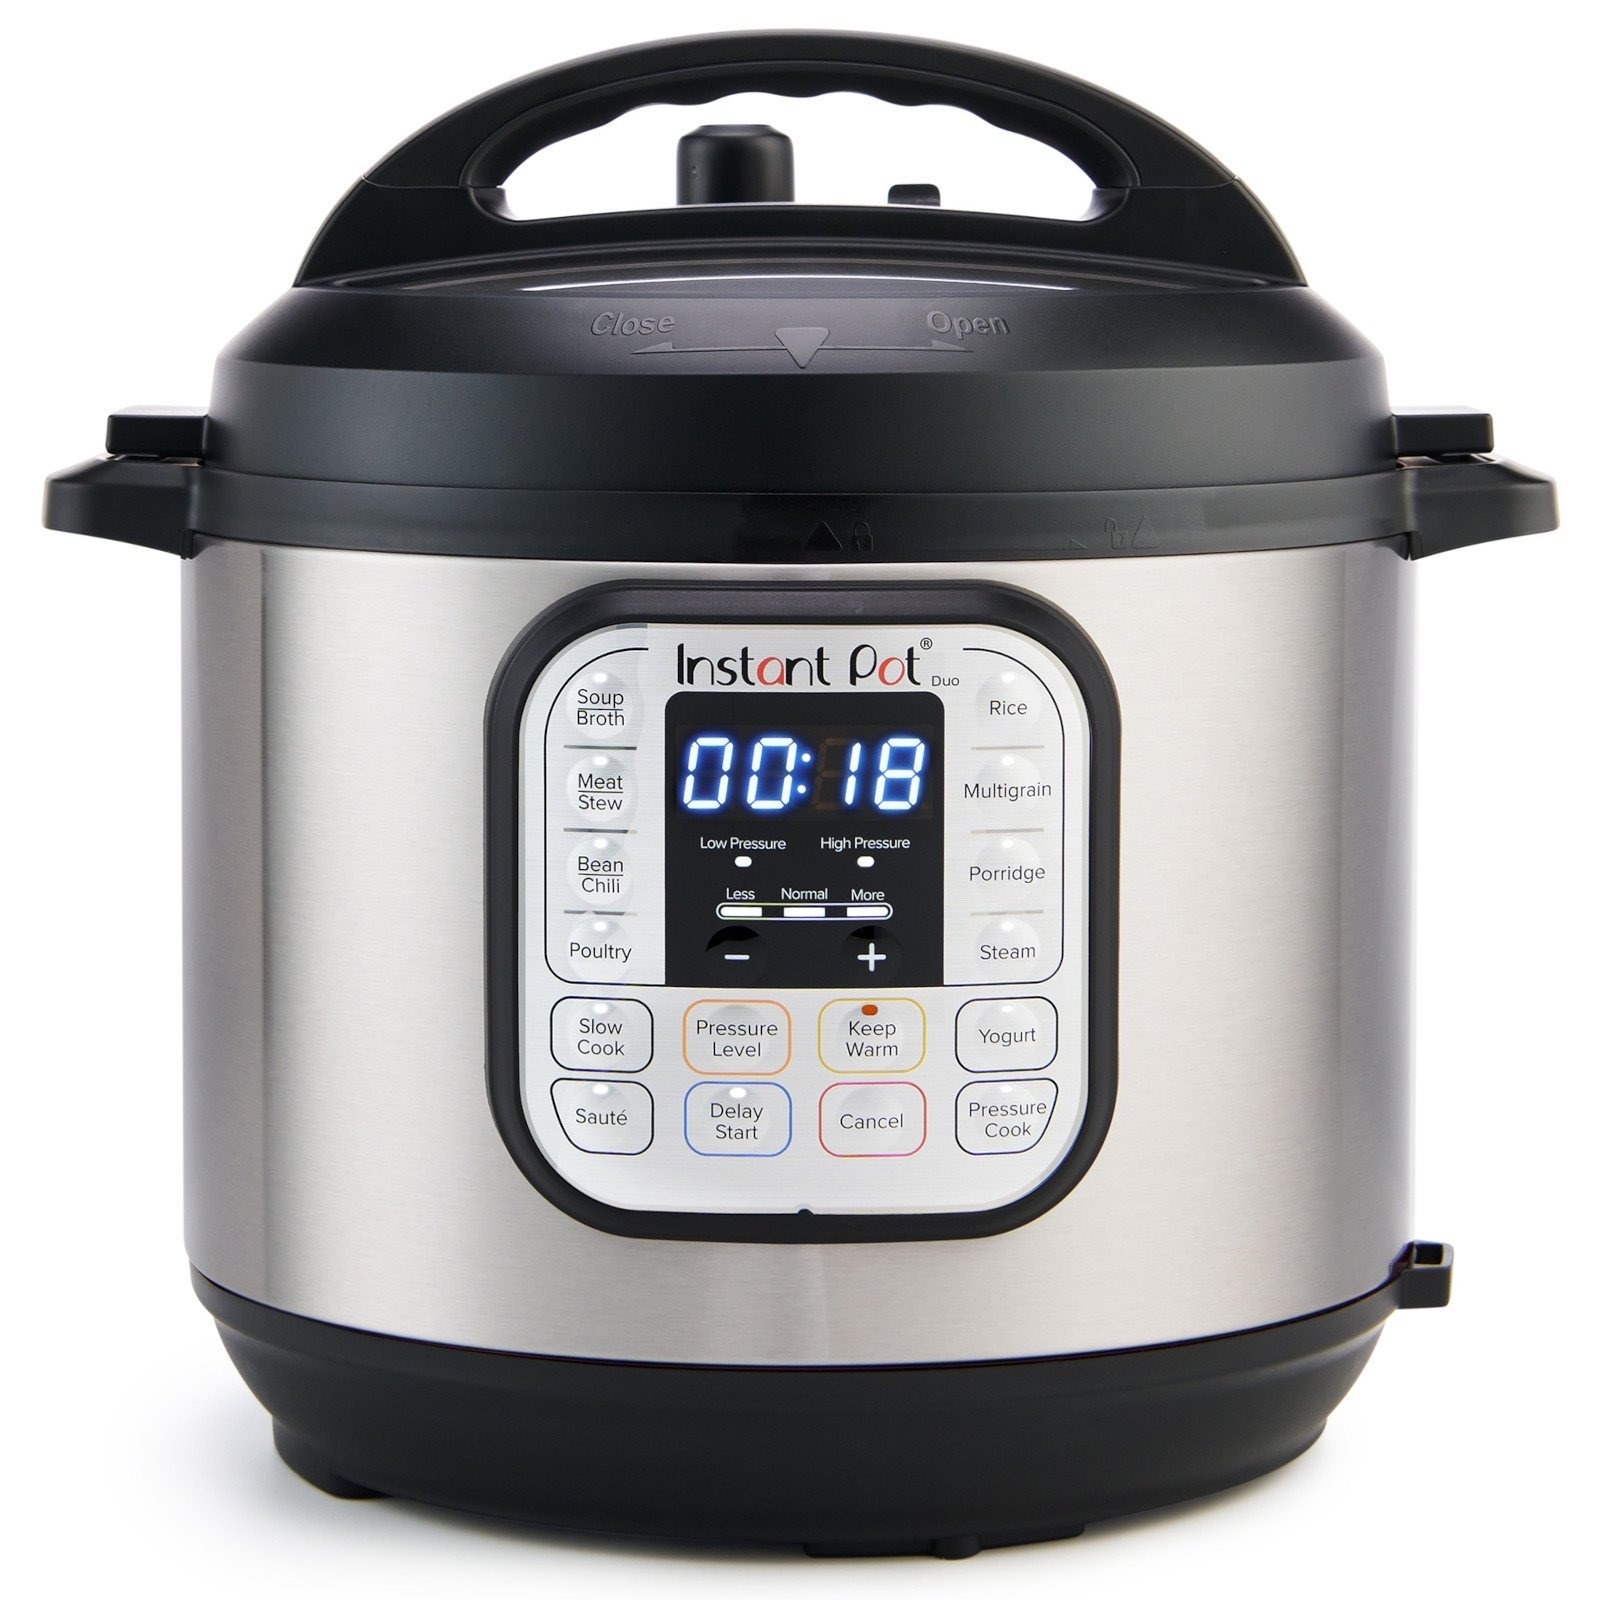 The Instant Pot with several different settings